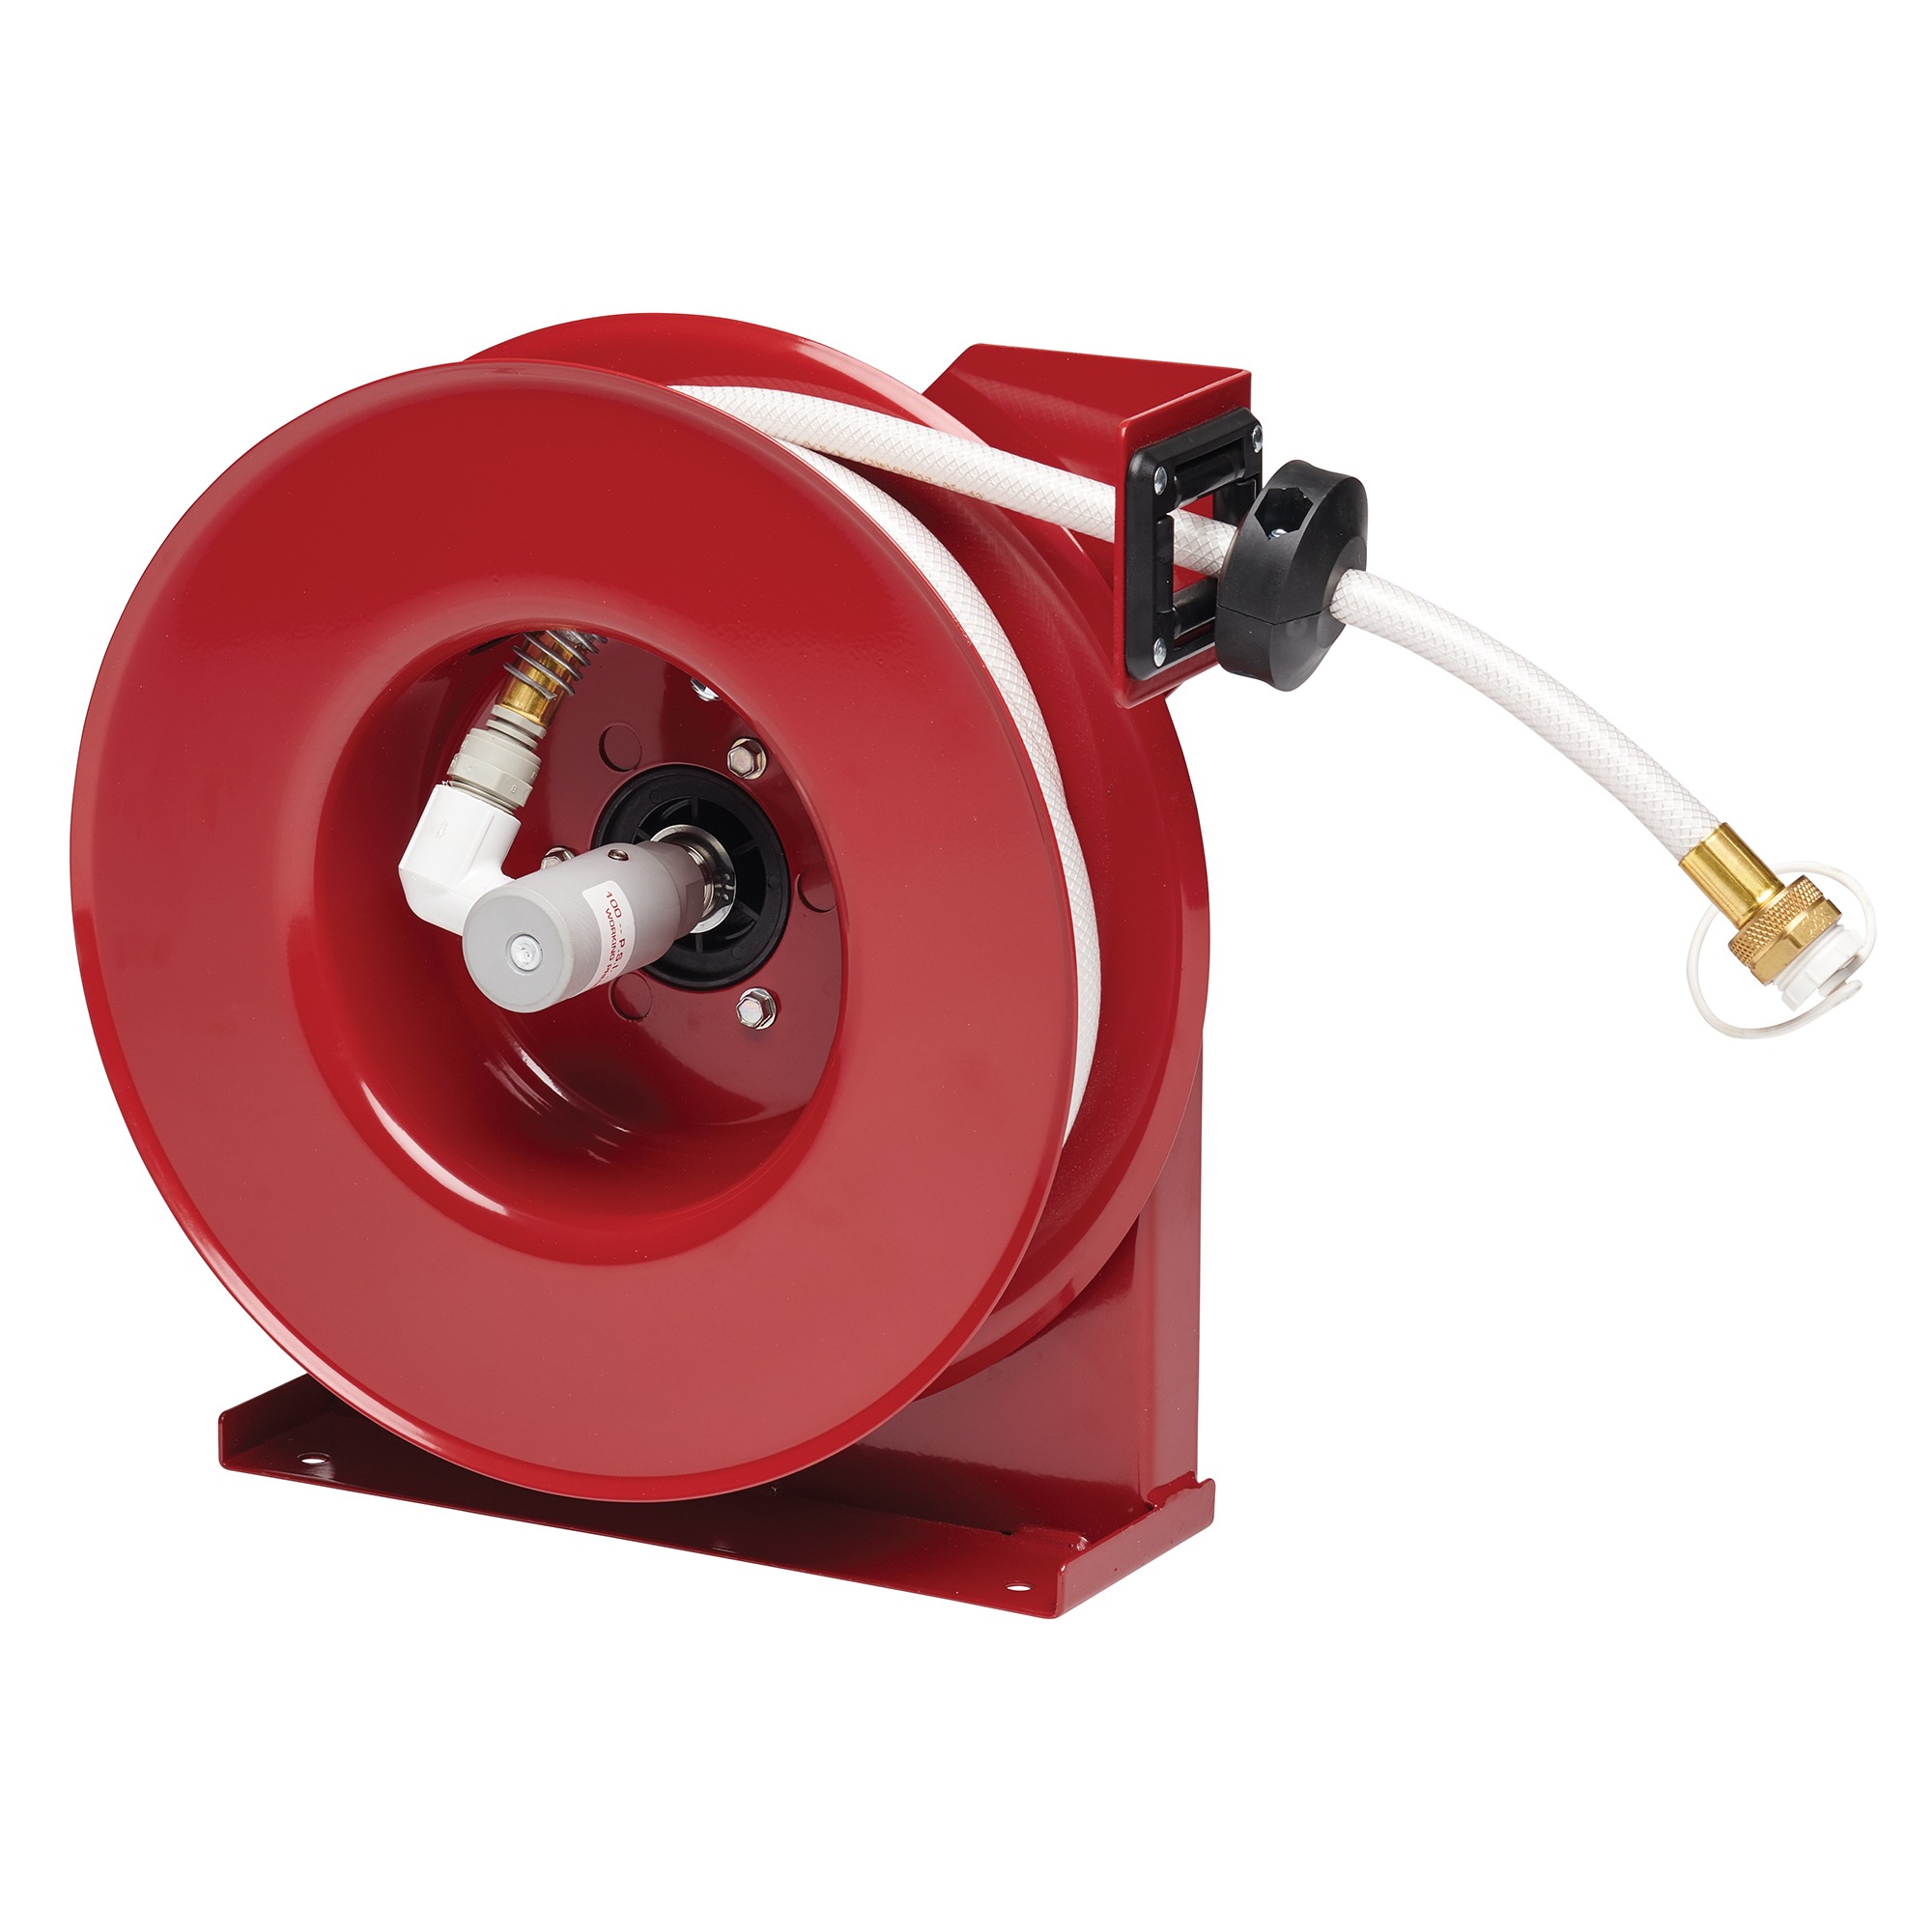 REELCRAFT 5635 OLSSW5 Stainless Steel Hose Reel 3/8"x35' 125 psi w/Hose & Nozzle 